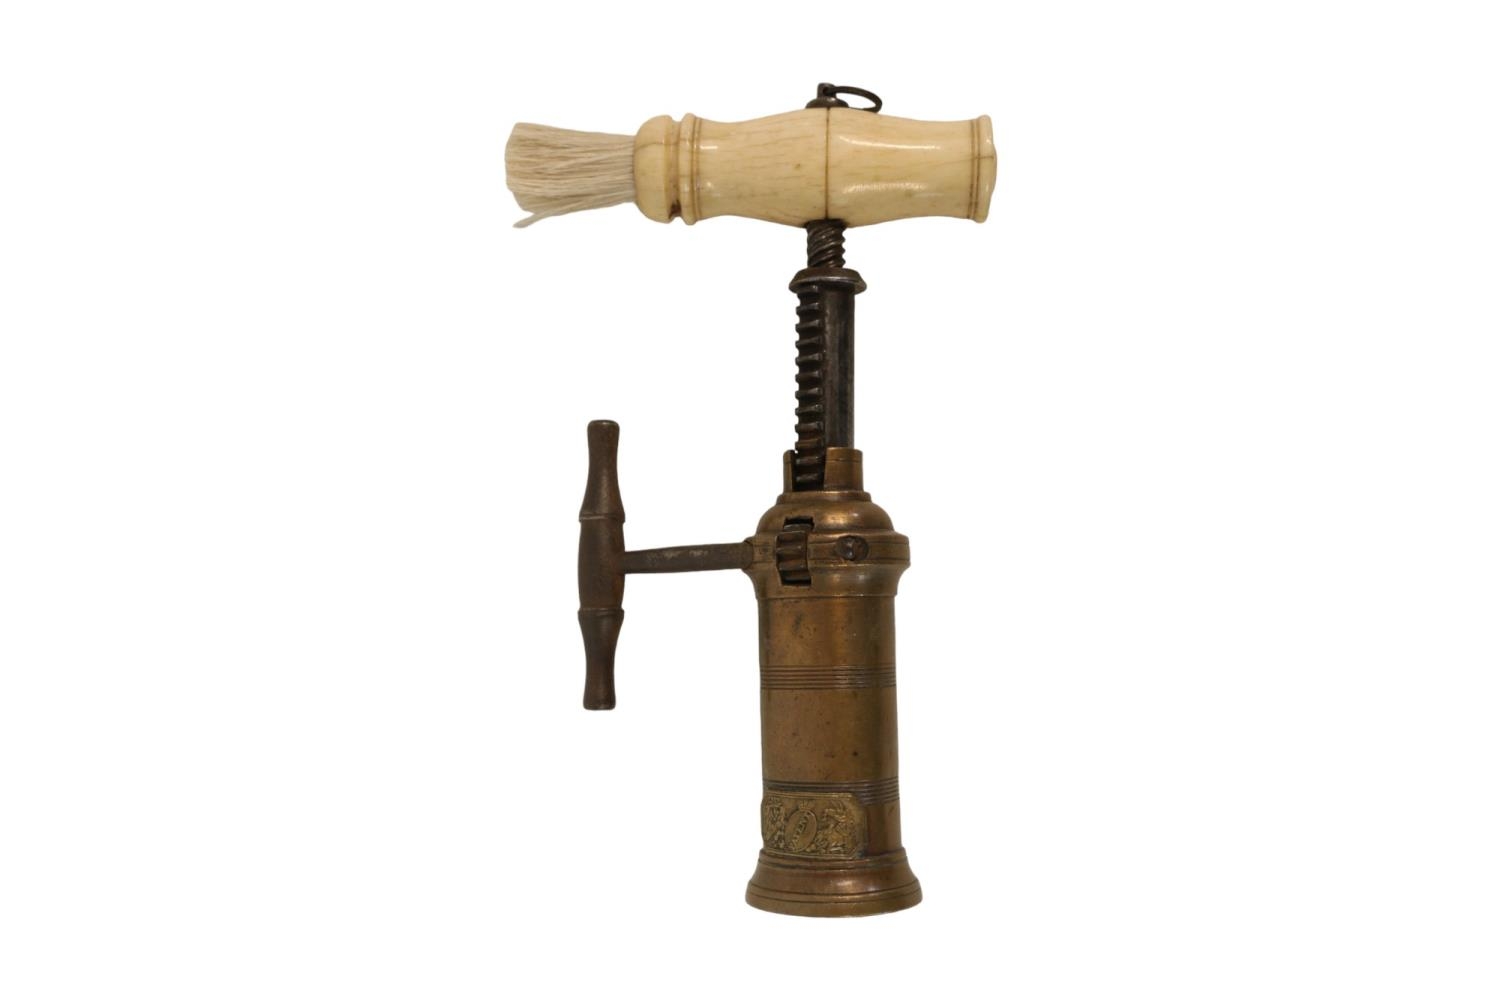 19thC English London Rack Corkscrew with turned bone handle with brush and hanging ring. Brass